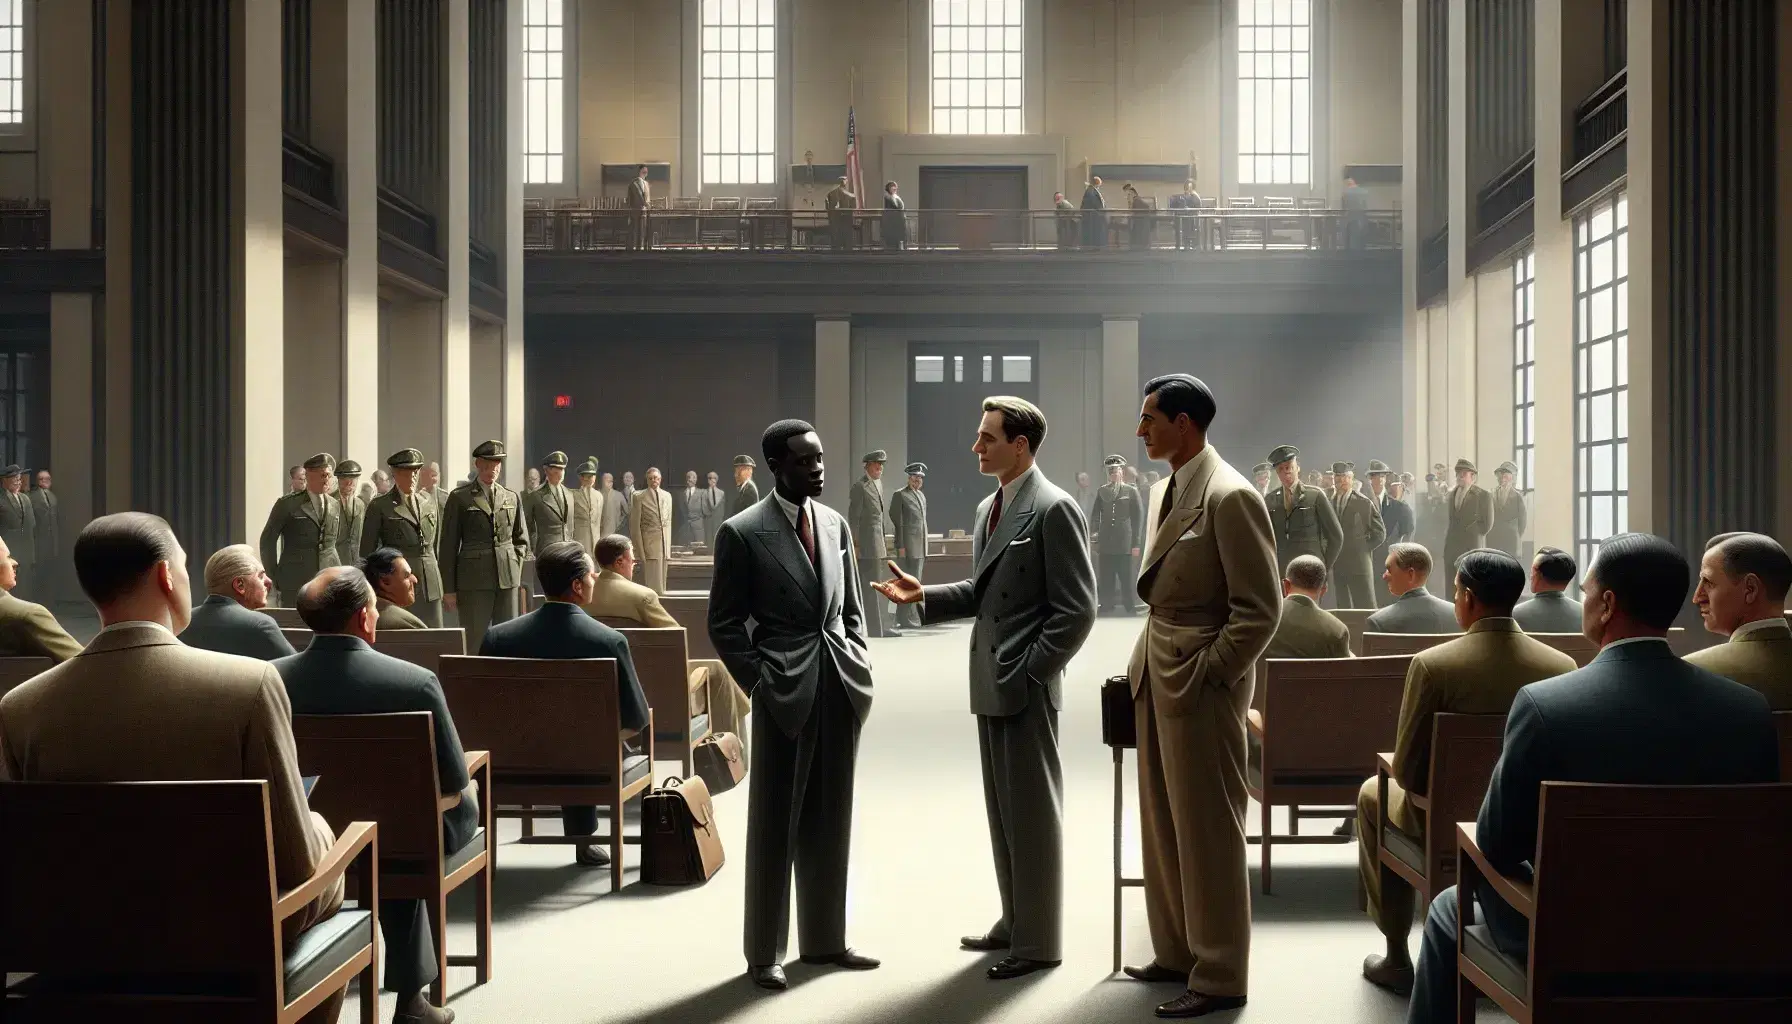 Late 1940s historical scene with a diverse trio of men in suits discussing earnestly, surrounded by diplomats and military personnel in a sparse, sunlit administrative hall.